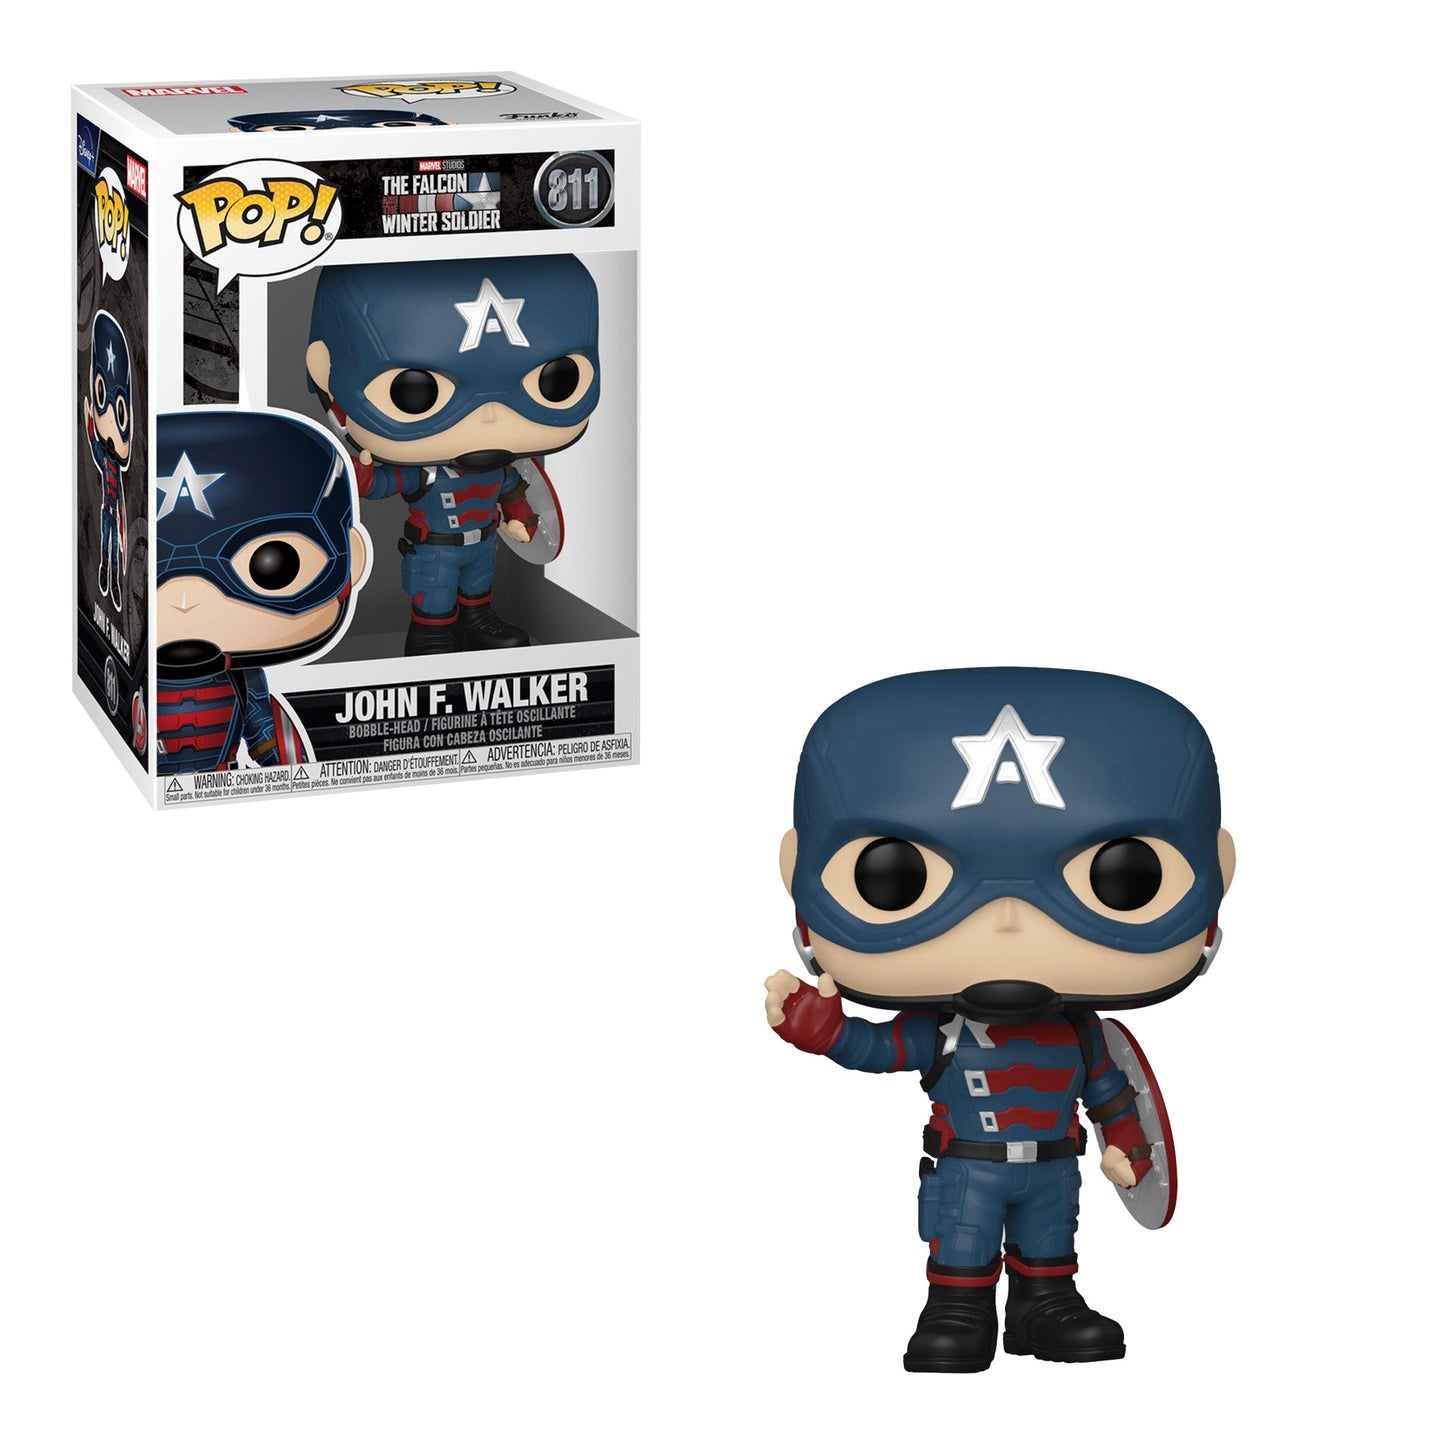 Funko Pop! Marvel: The Falcon and the Winter Soldier - John F. Walker #811